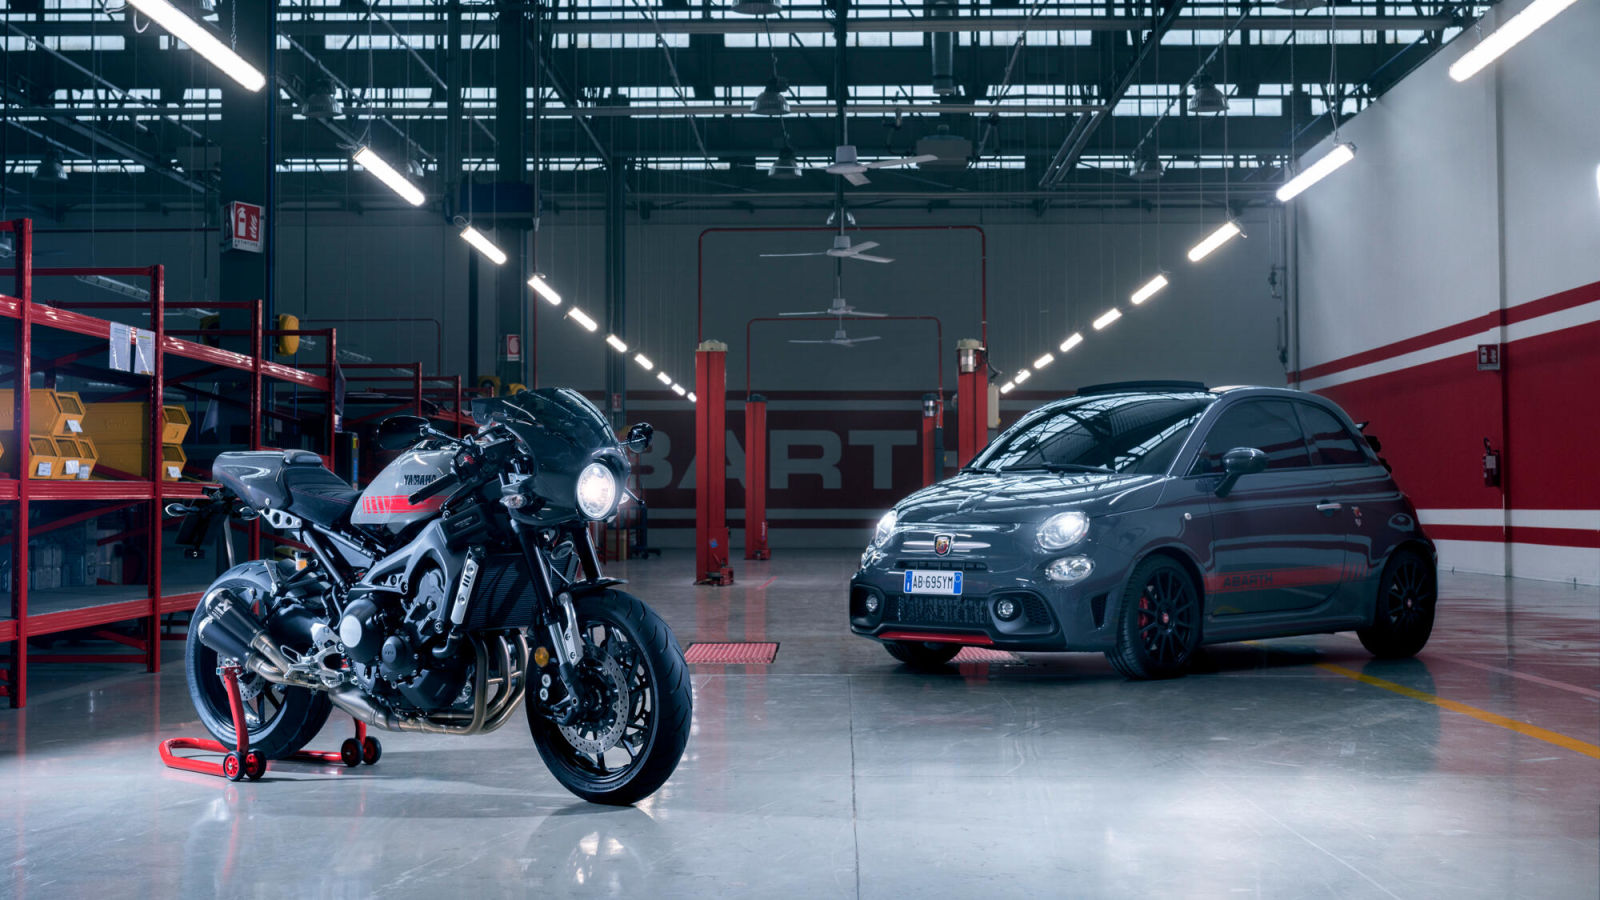 Illustration for article titled TIL: Yamaha sold an Abarth and Abarth sold a Yamaha